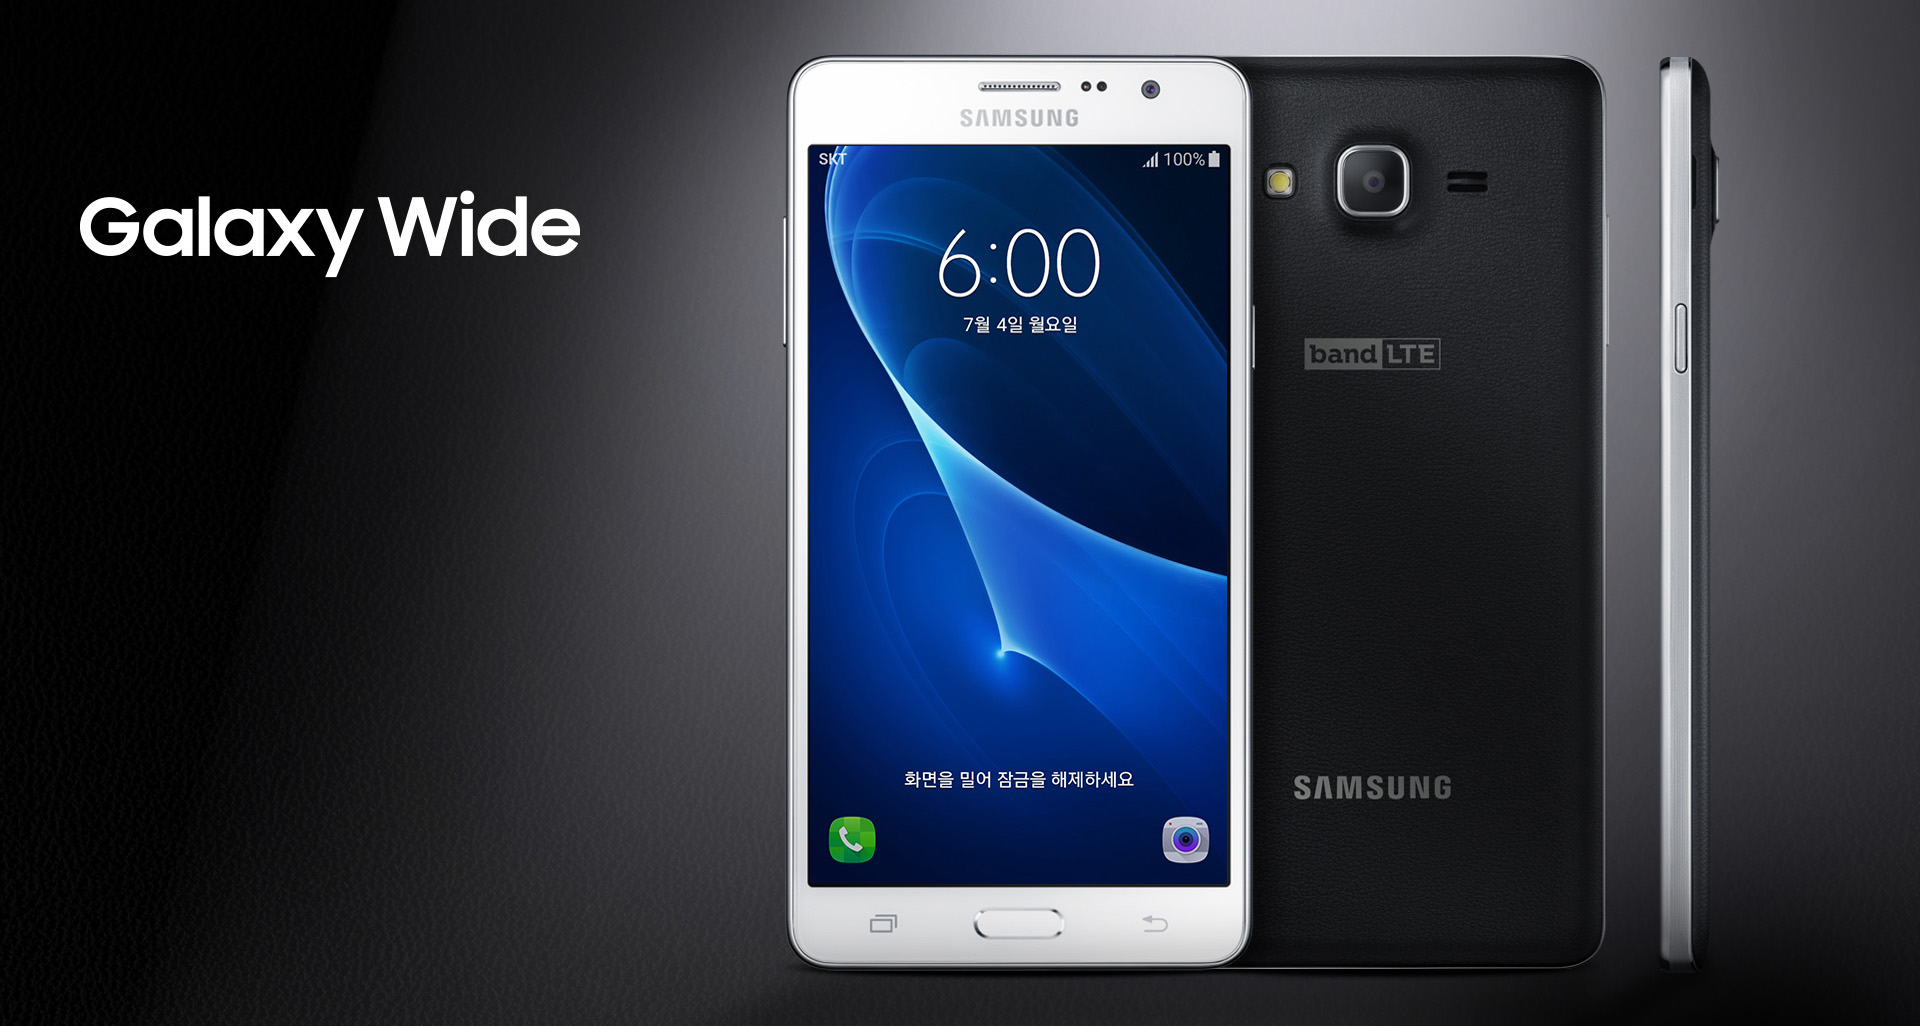 Samsung Galaxy Wide launched with Snapdragon 410, 2GB RAM and 3000mAh battery - Times ...